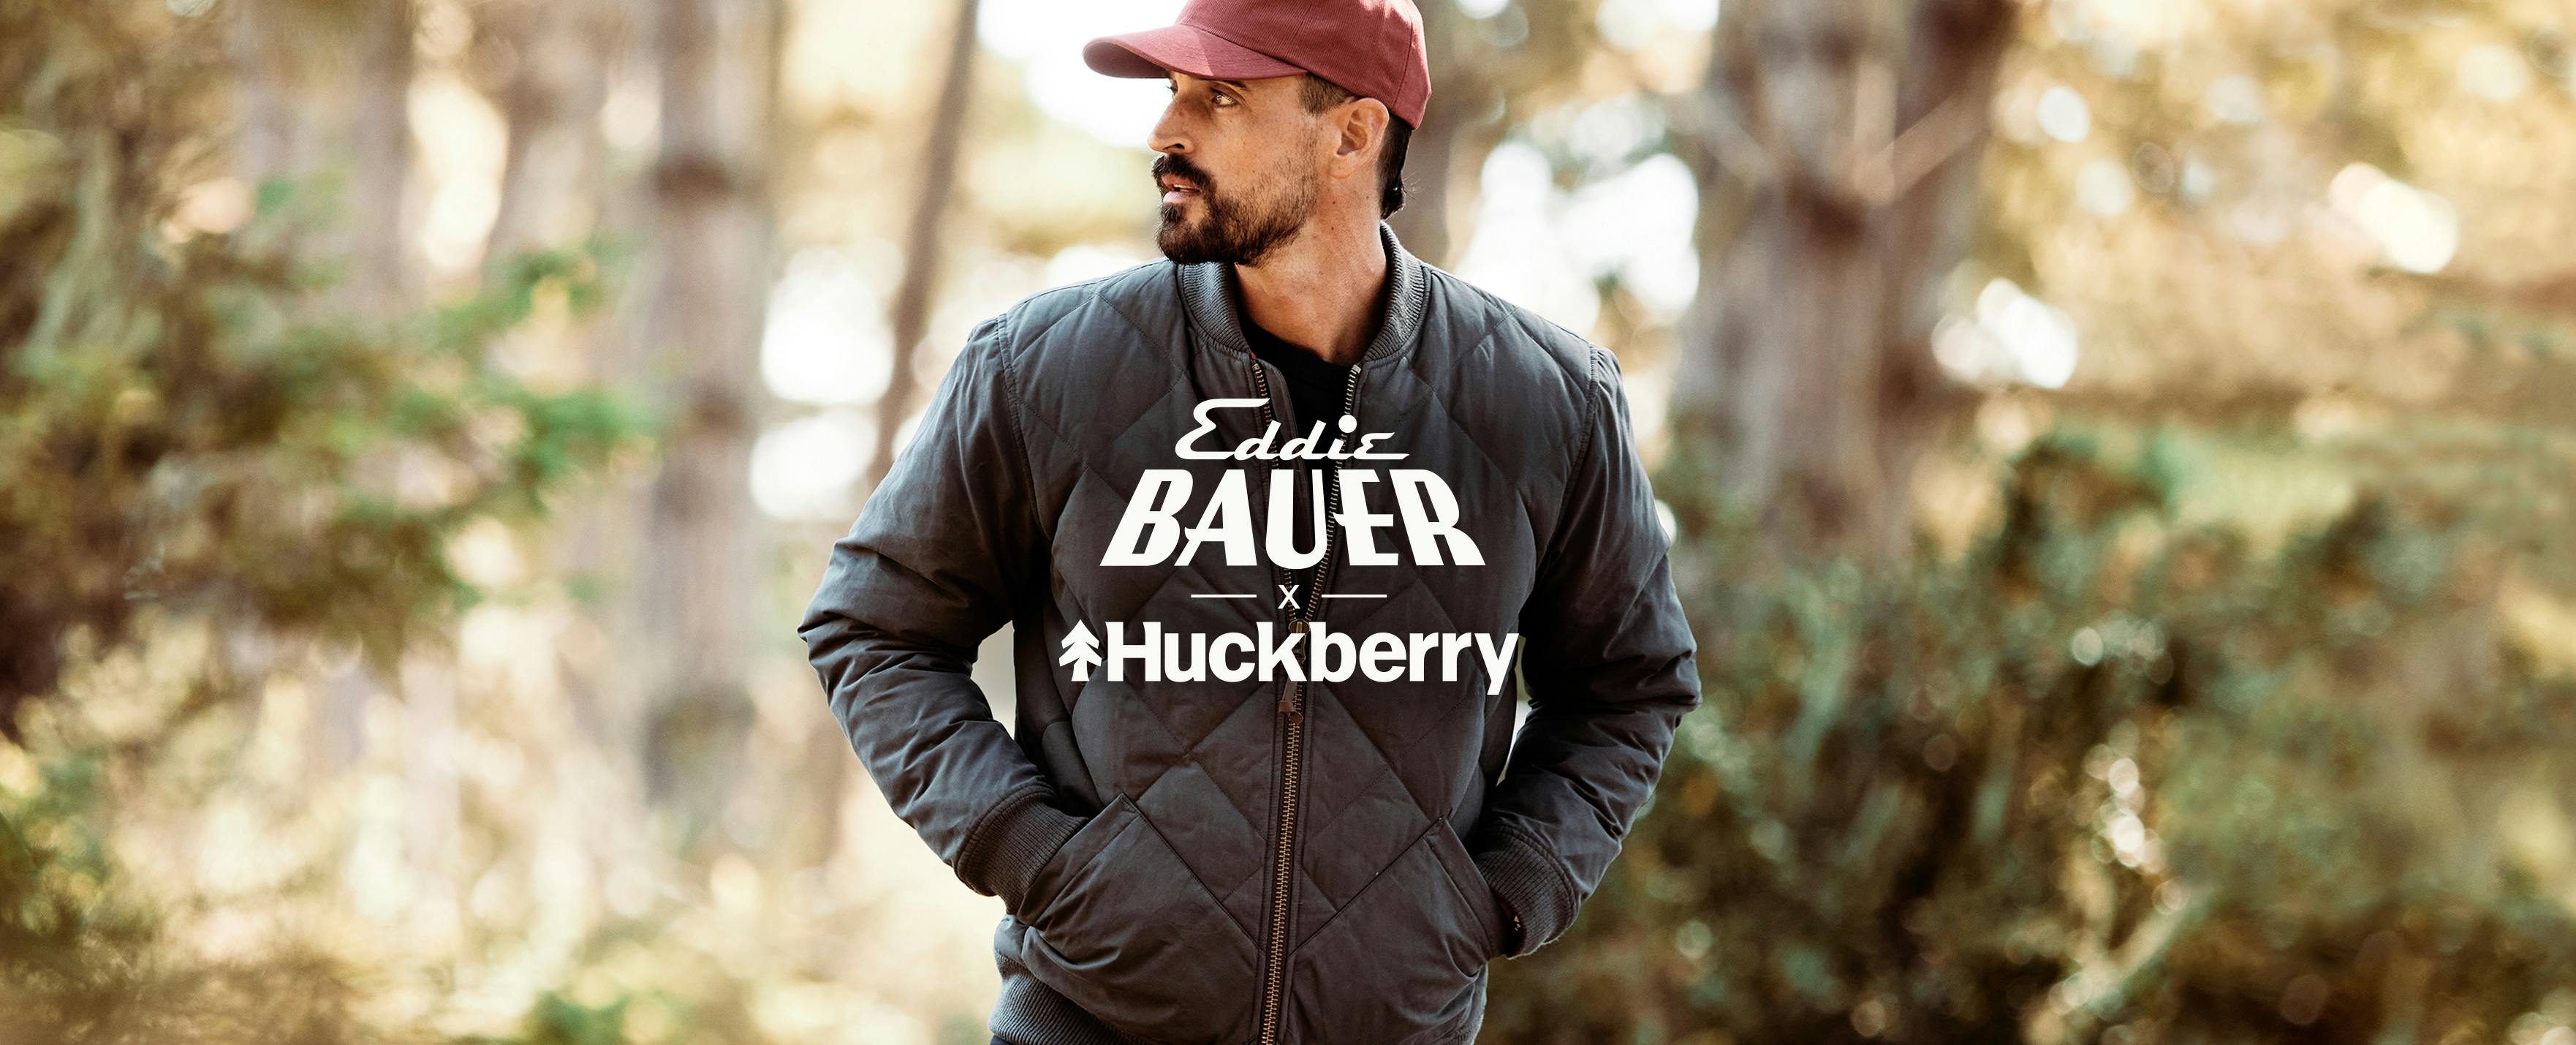 Man in Woods Wearing Jacket with Huckberry and Eddie Bauer logo on top of image